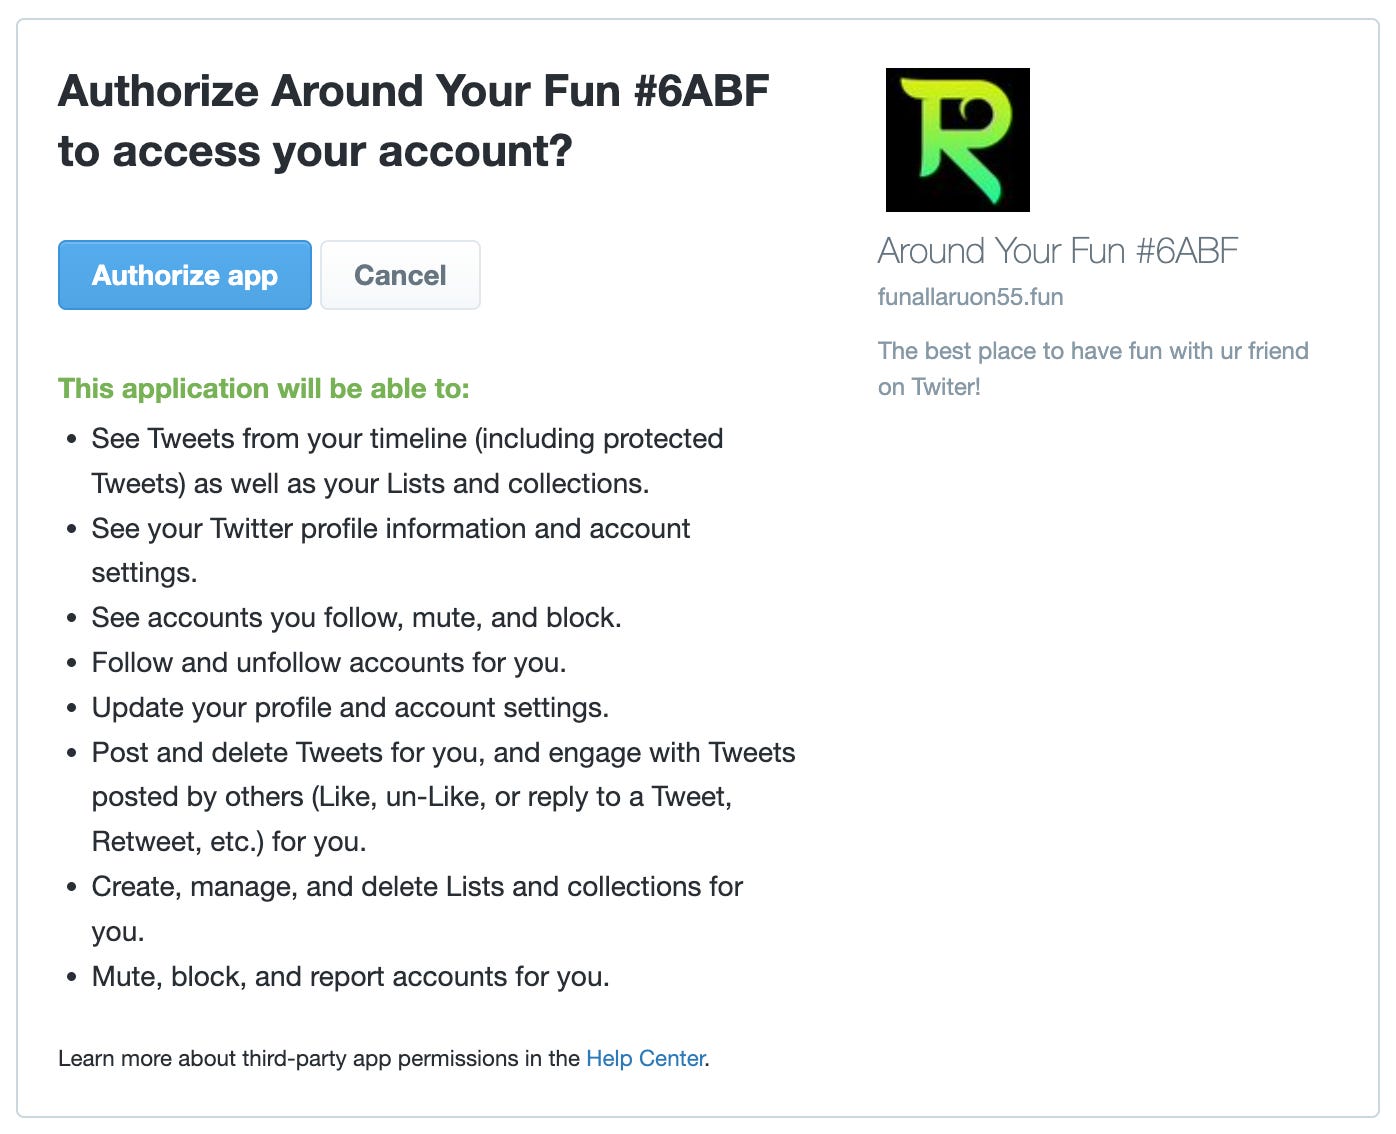 screenshot of the Twitter permissions Round Year Fun requests access to (basically, all of them)